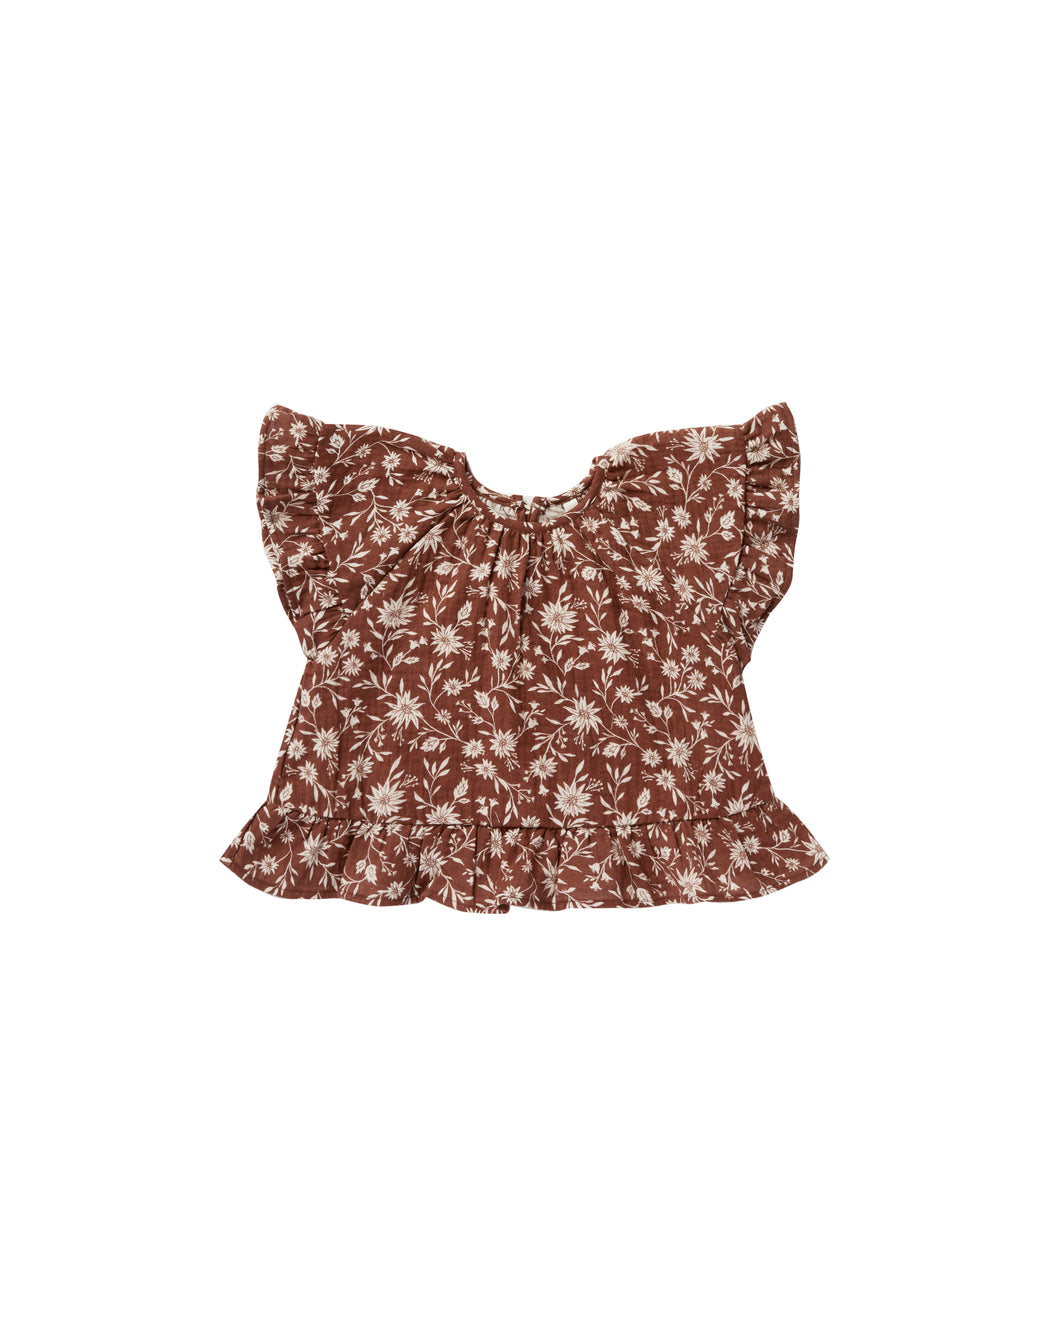 Butterfly top - wild floral